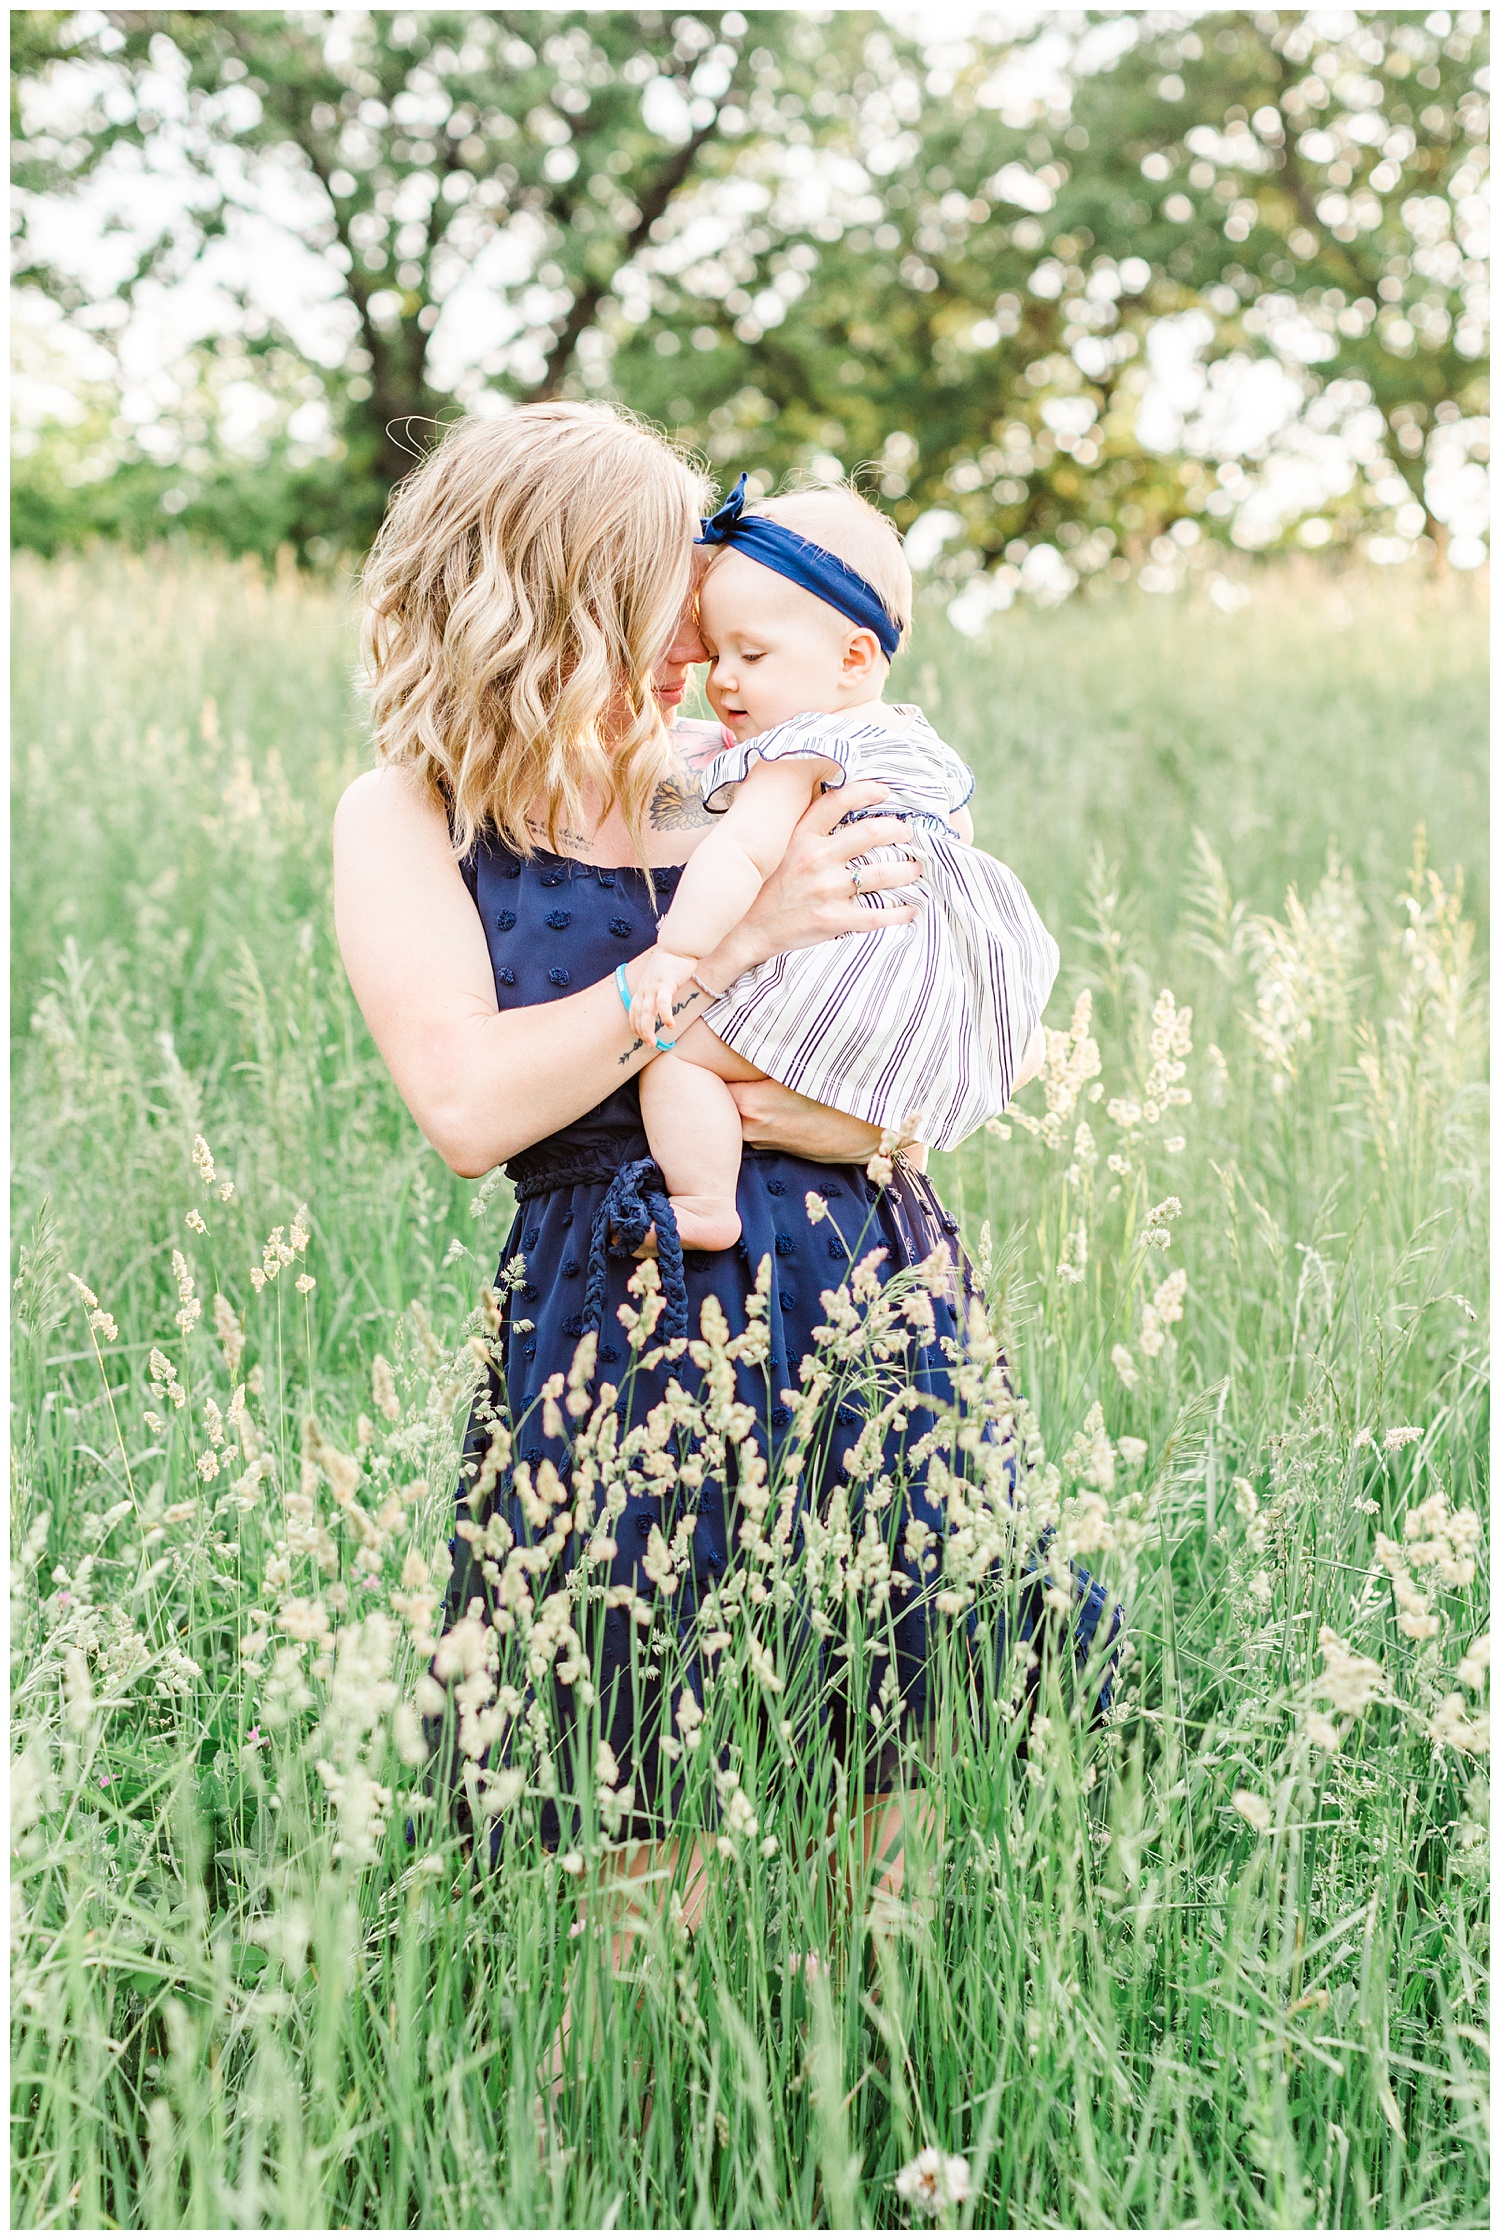 Mama embraces her baby girl at holden hour in a grassy field in Iowa | CB Studio